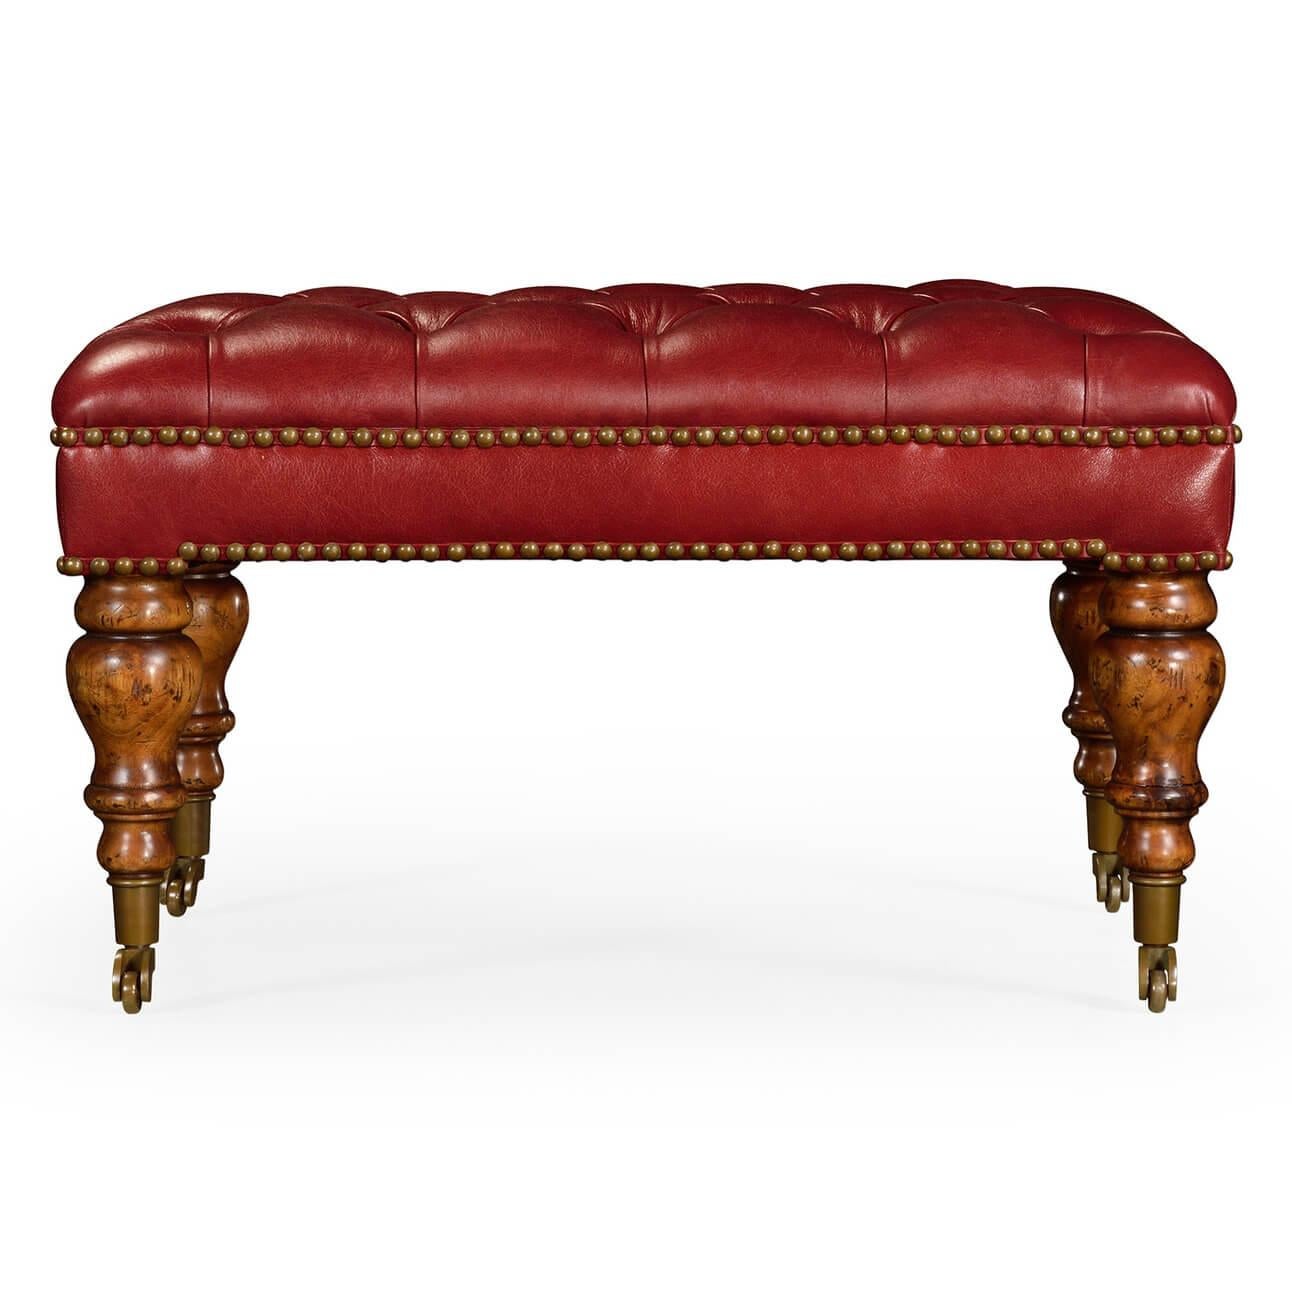 A large English Classic style leather upholstered, button-tufted footstool or ottoman with turned legs and brass casters.

Dimensions: 26.5